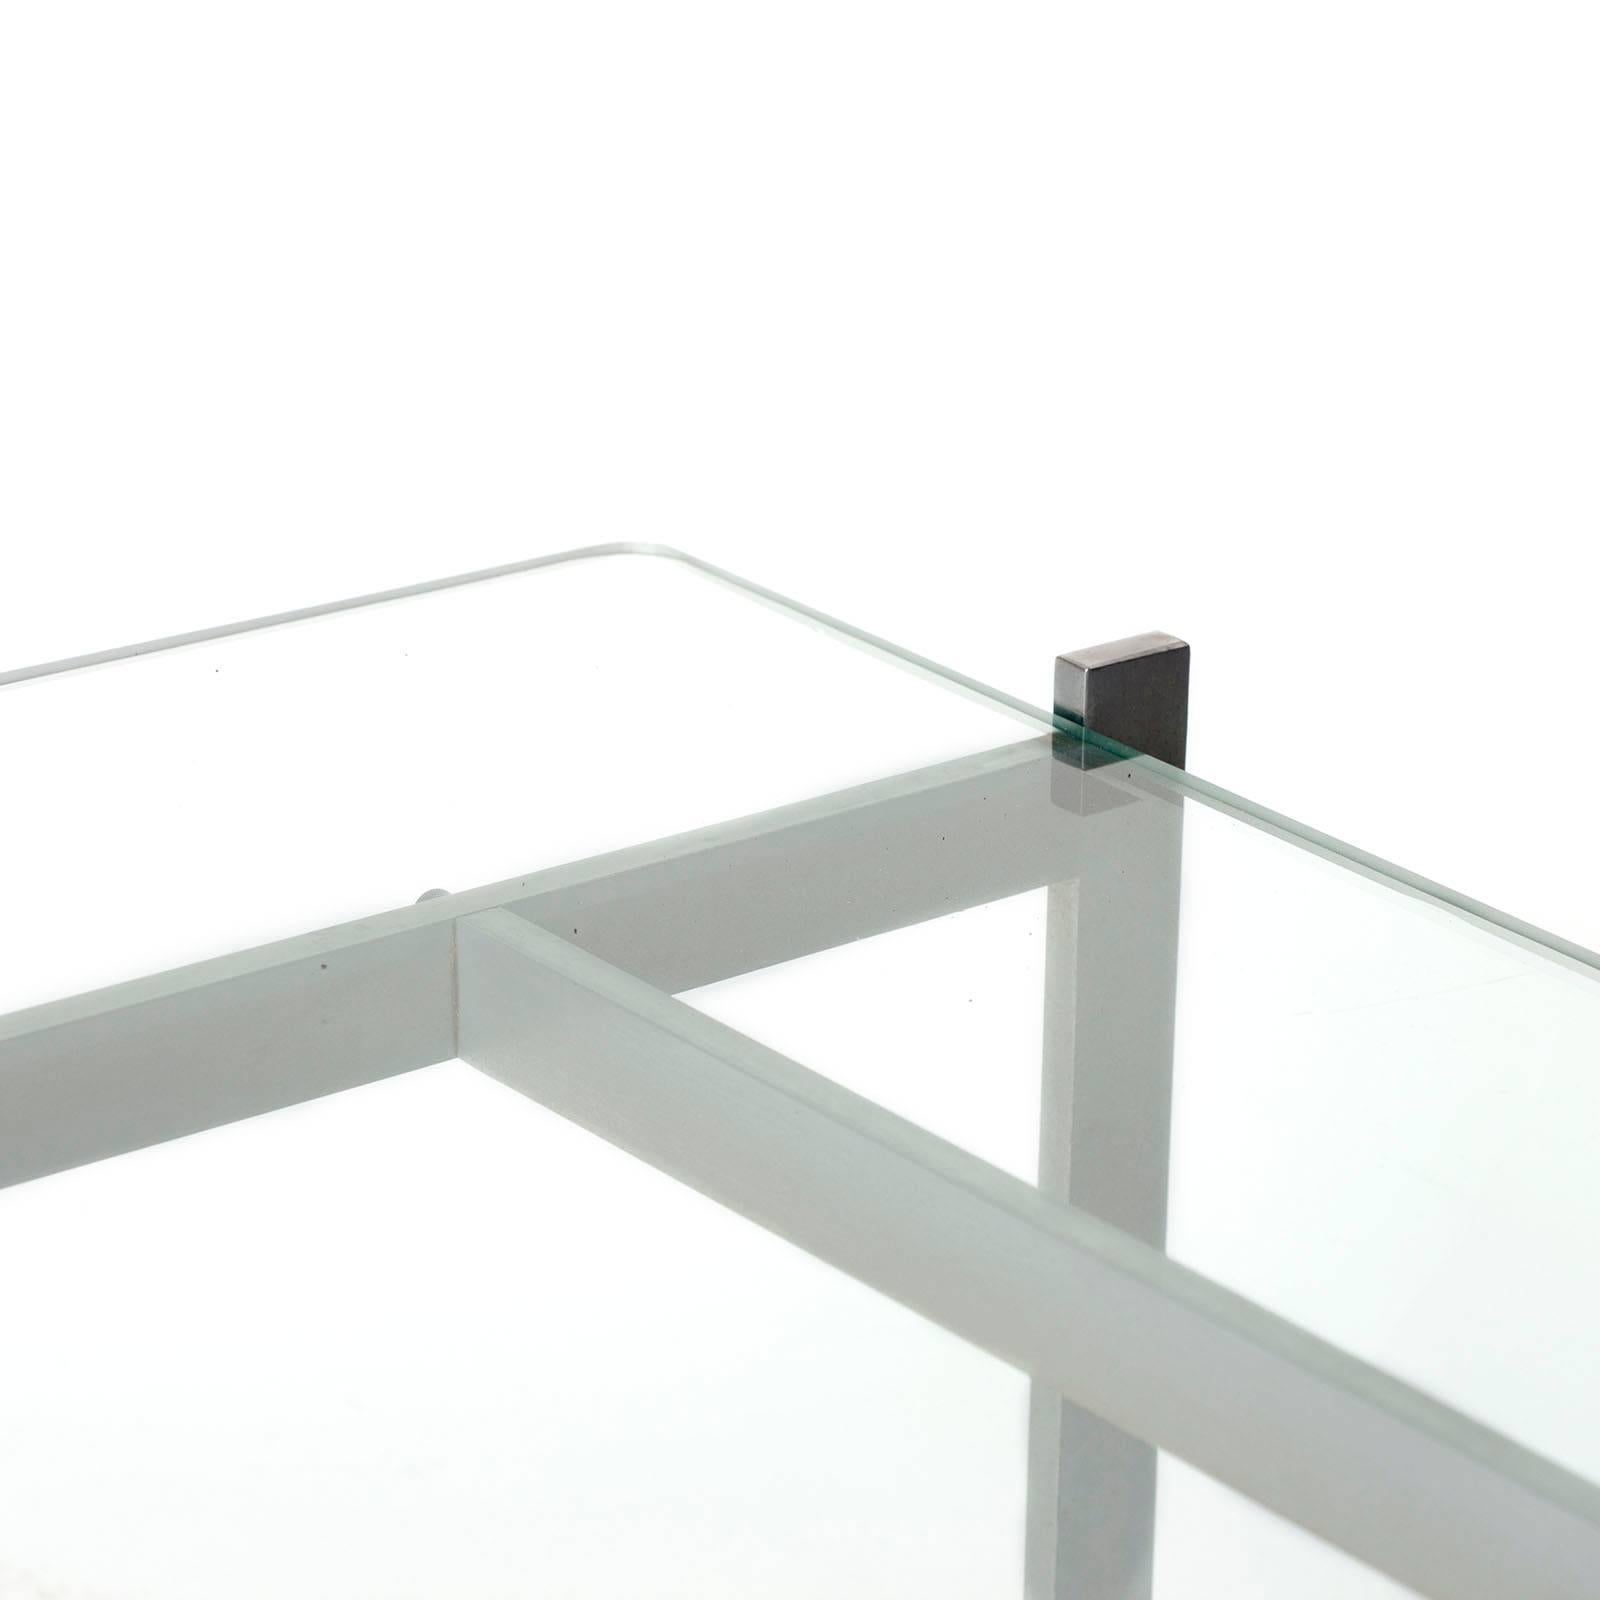 Early coffee table designed by Poul Kjærholm in 1956. Manufactured by E. Kold Christensen, the stamp of the manufactured is present on the structure. Matt chrome-plated steel frame, glass top, with a small chip under on one corner.

Free shipping